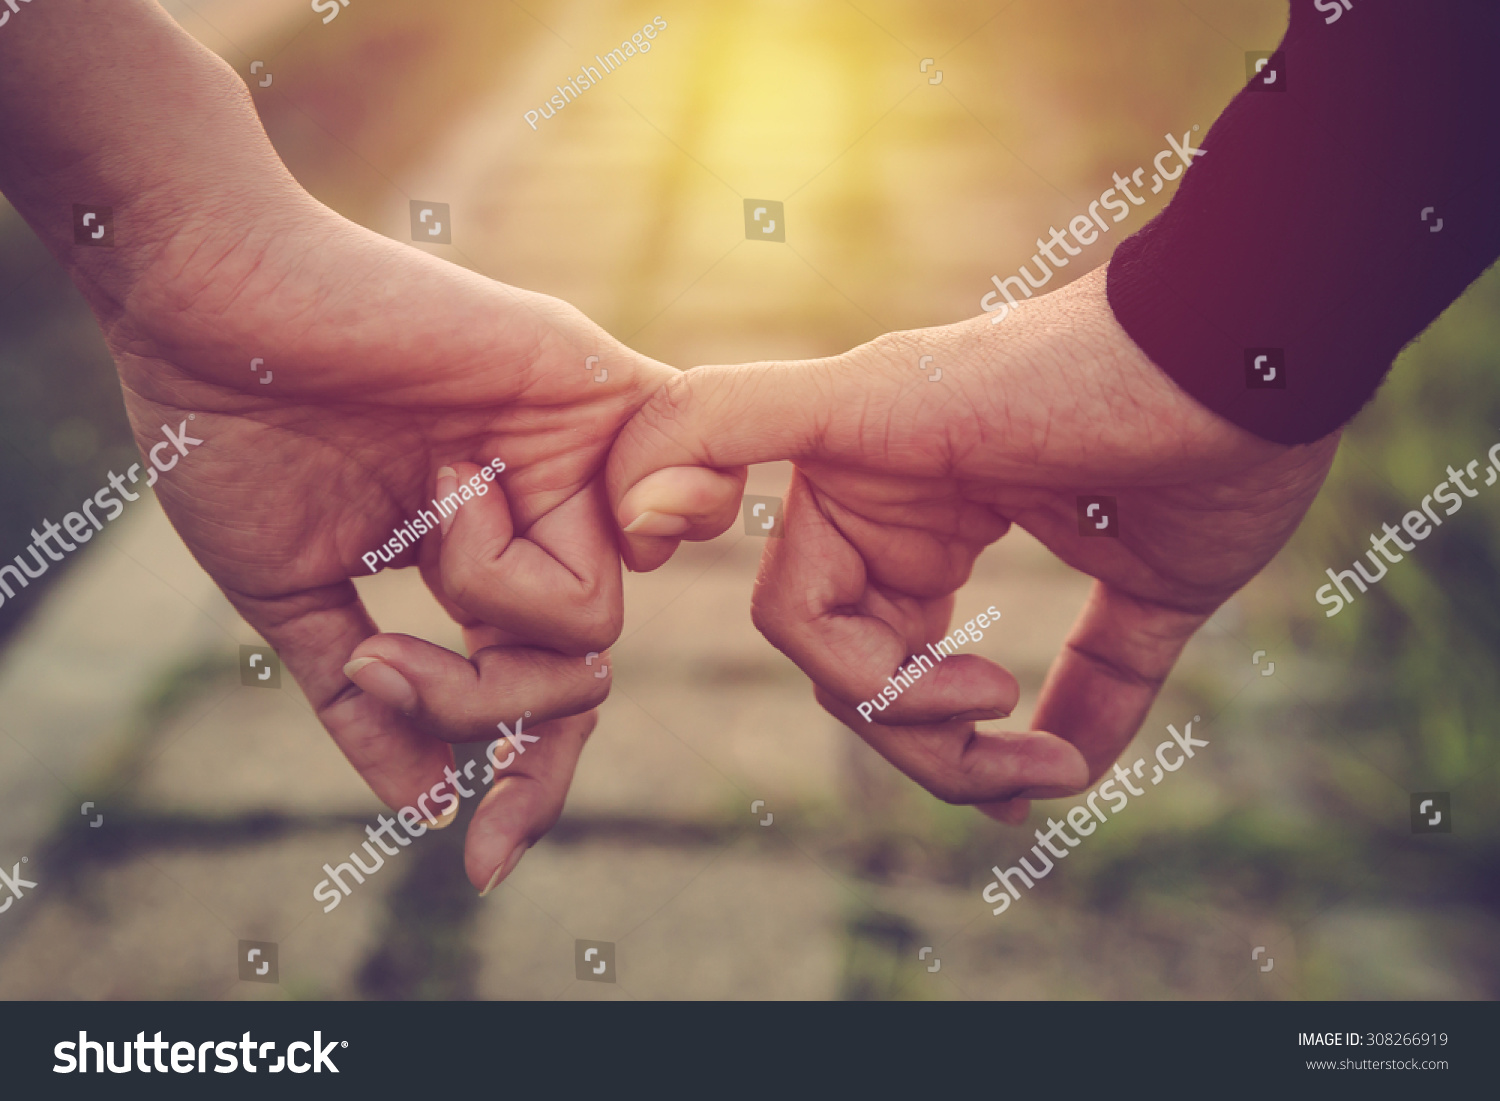 Valentine day background. Happy couple holding hands together as forever love. Vintage filter. #308266919